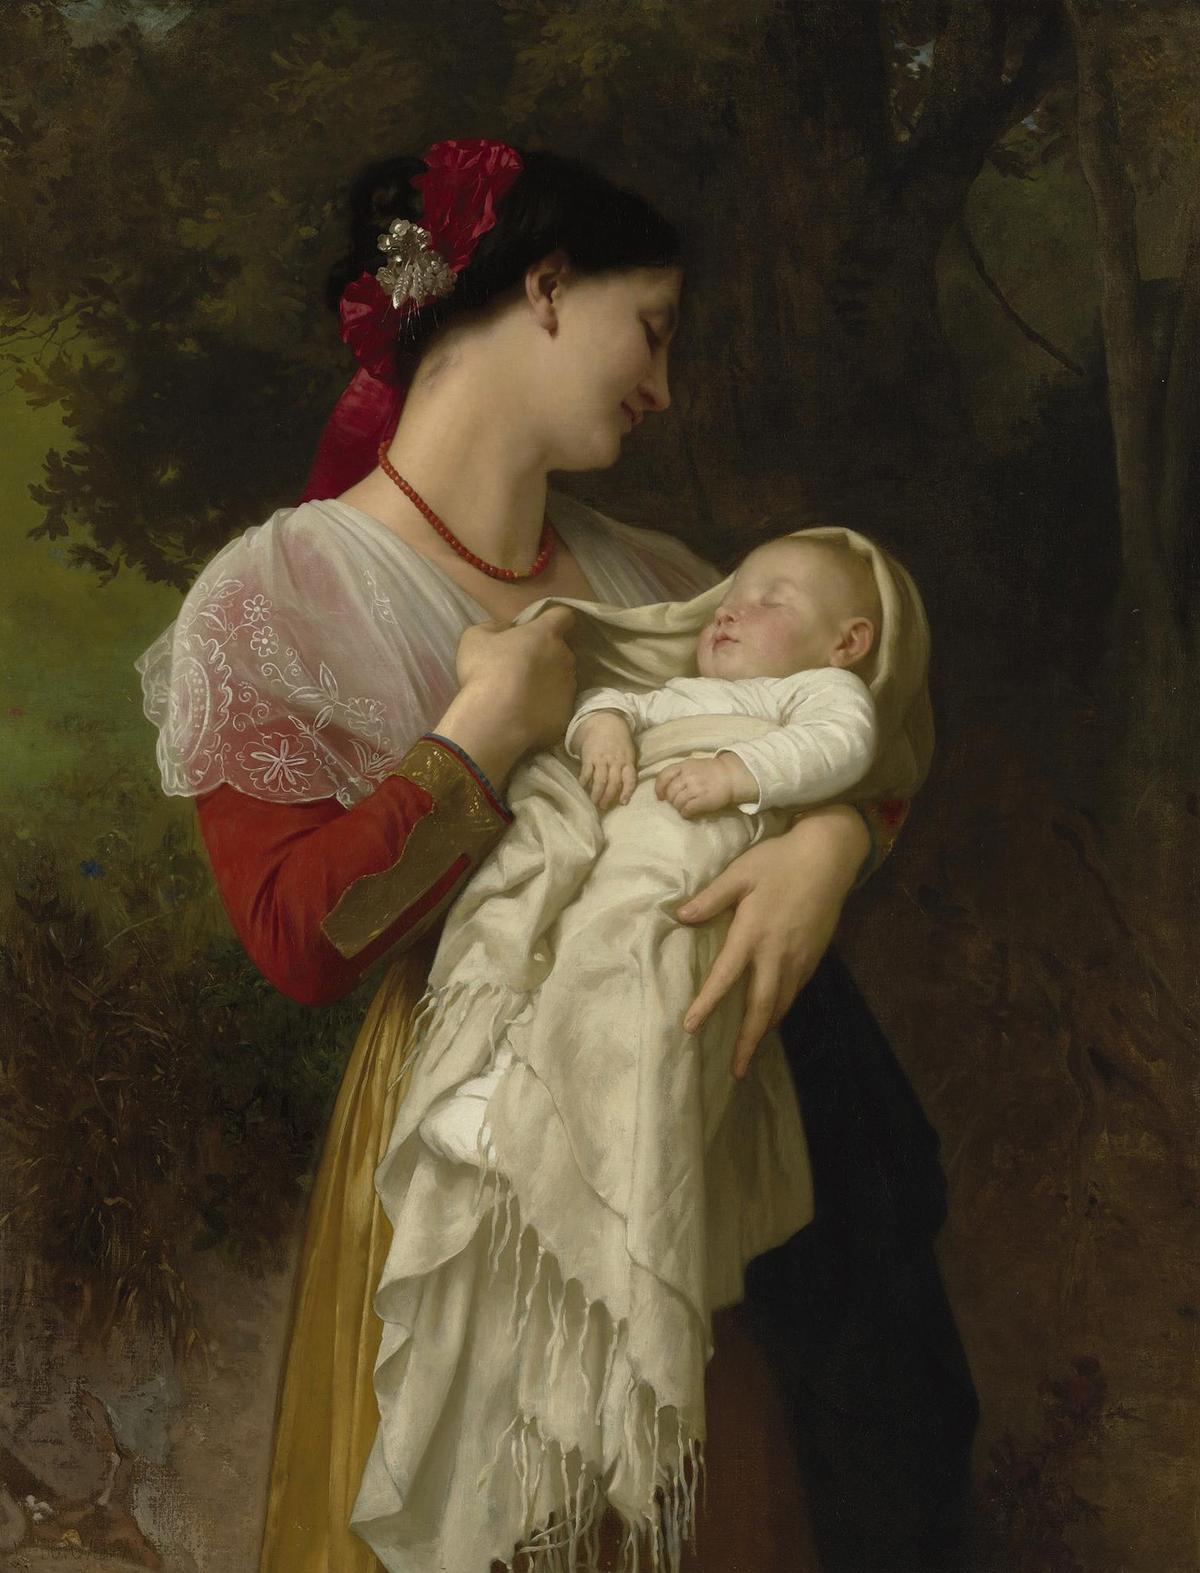 "Maternal Admiration," 1869, by William Adolphe Bouguereau. Oil on canvas. Private collection. (Public Domain)